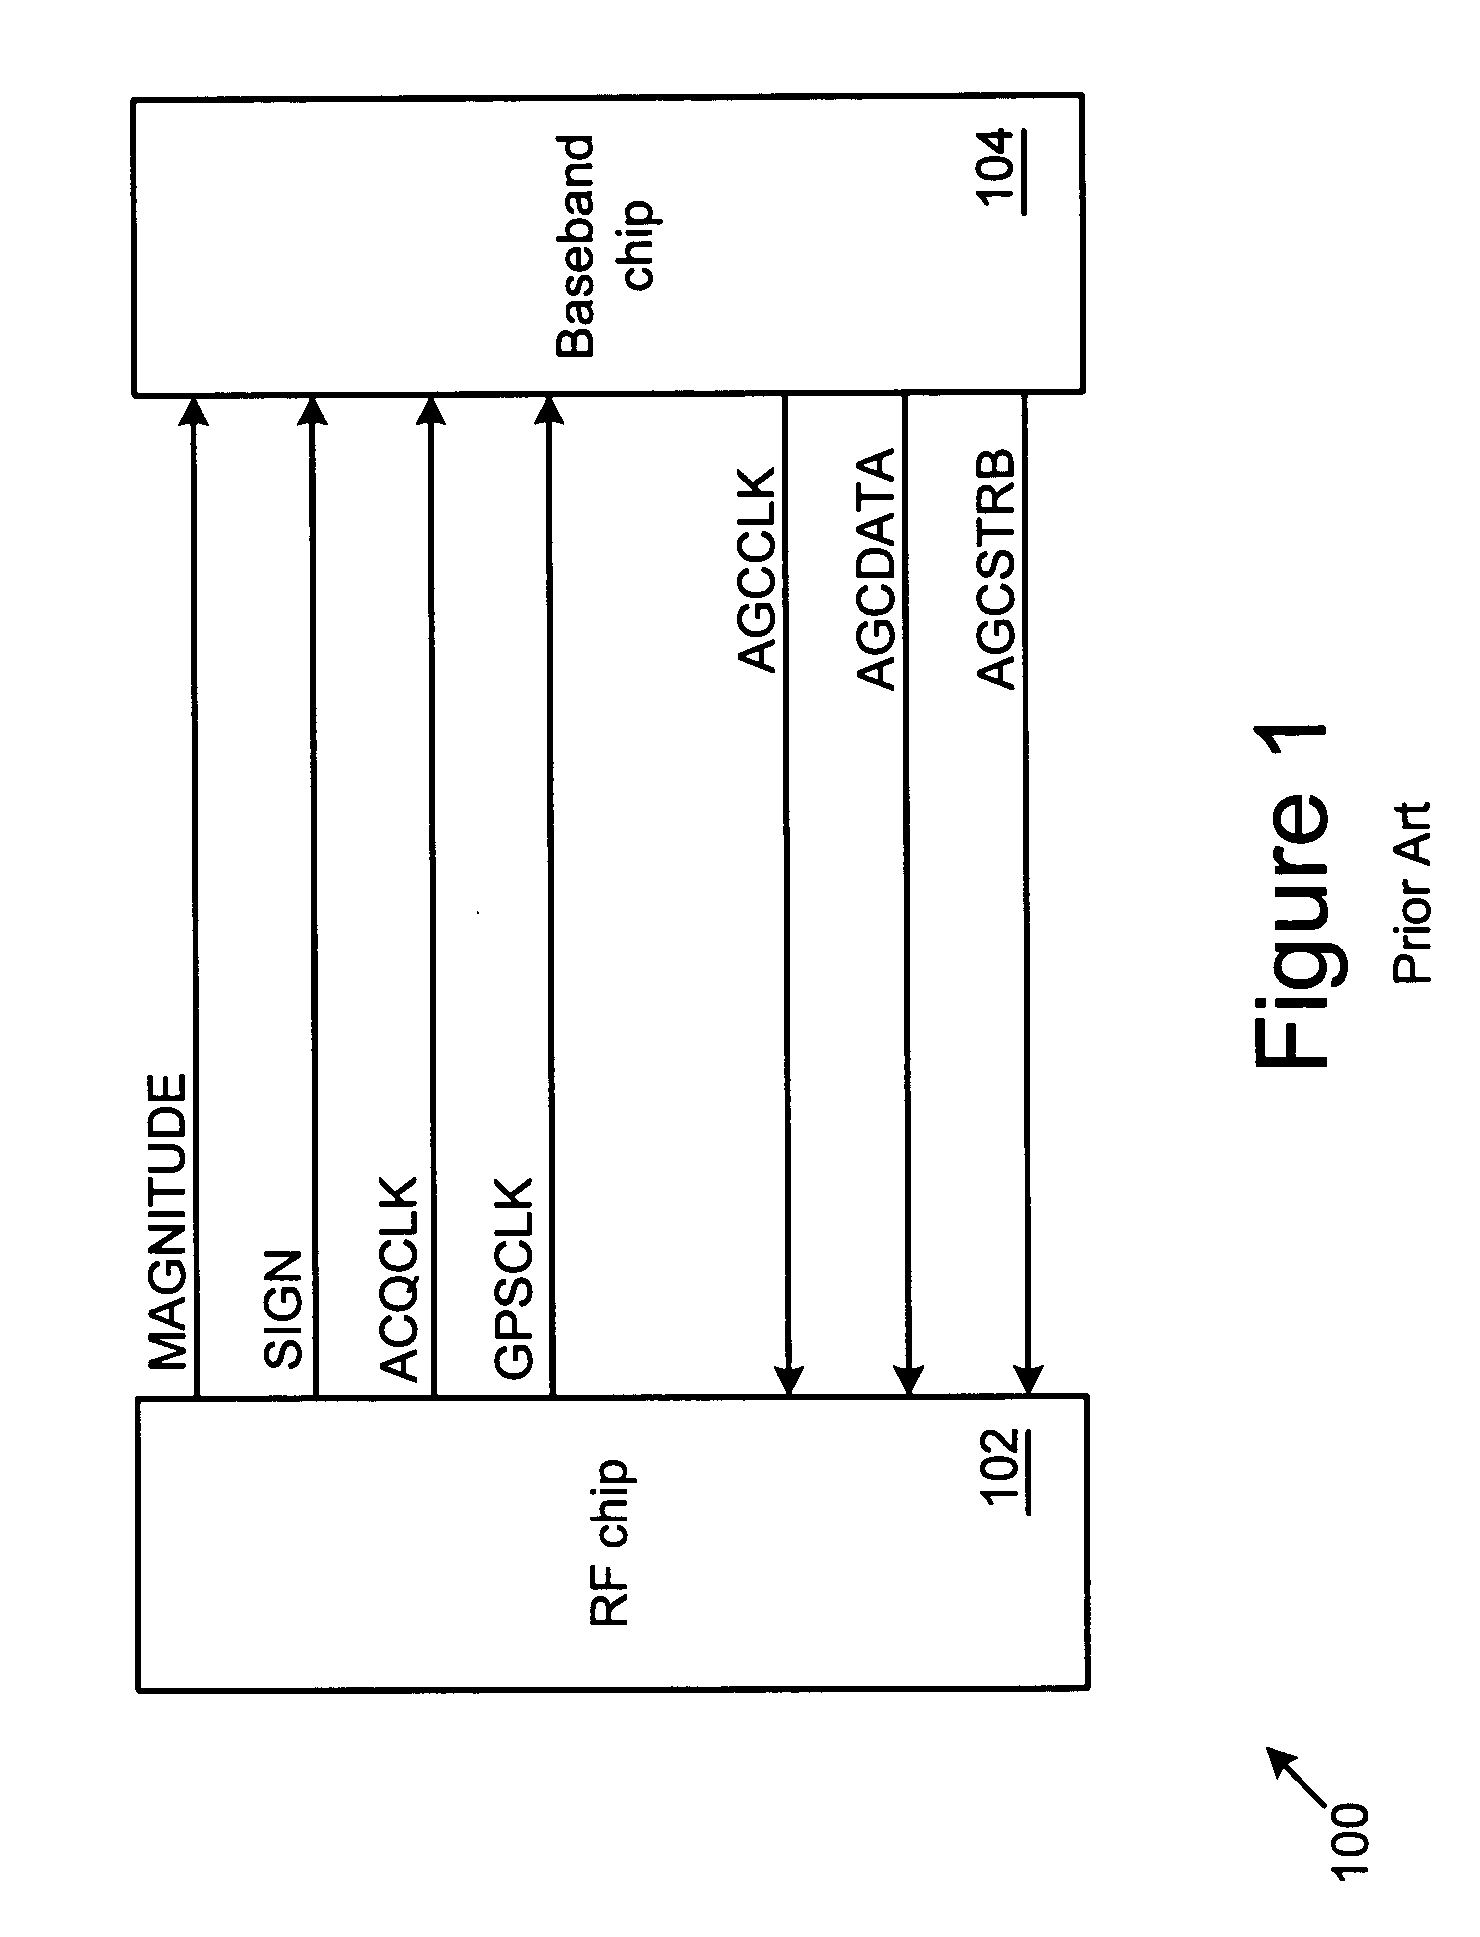 Serial radio frequency to baseband interface with power control